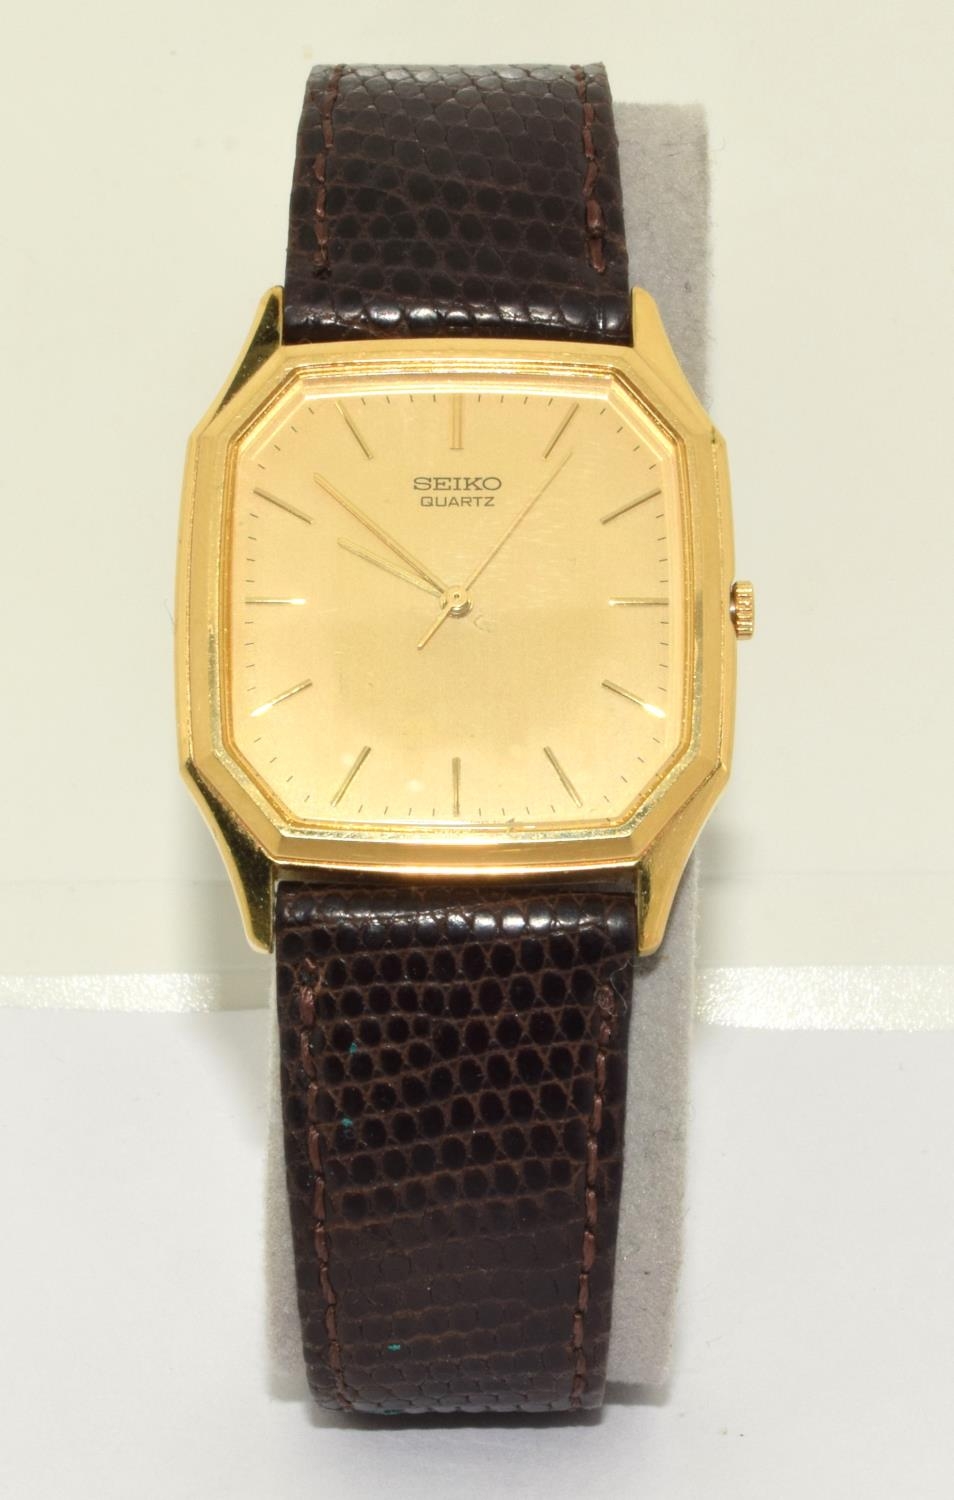 Seiko gilt face gents Dress watch on a leather strap boxed - Image 6 of 6